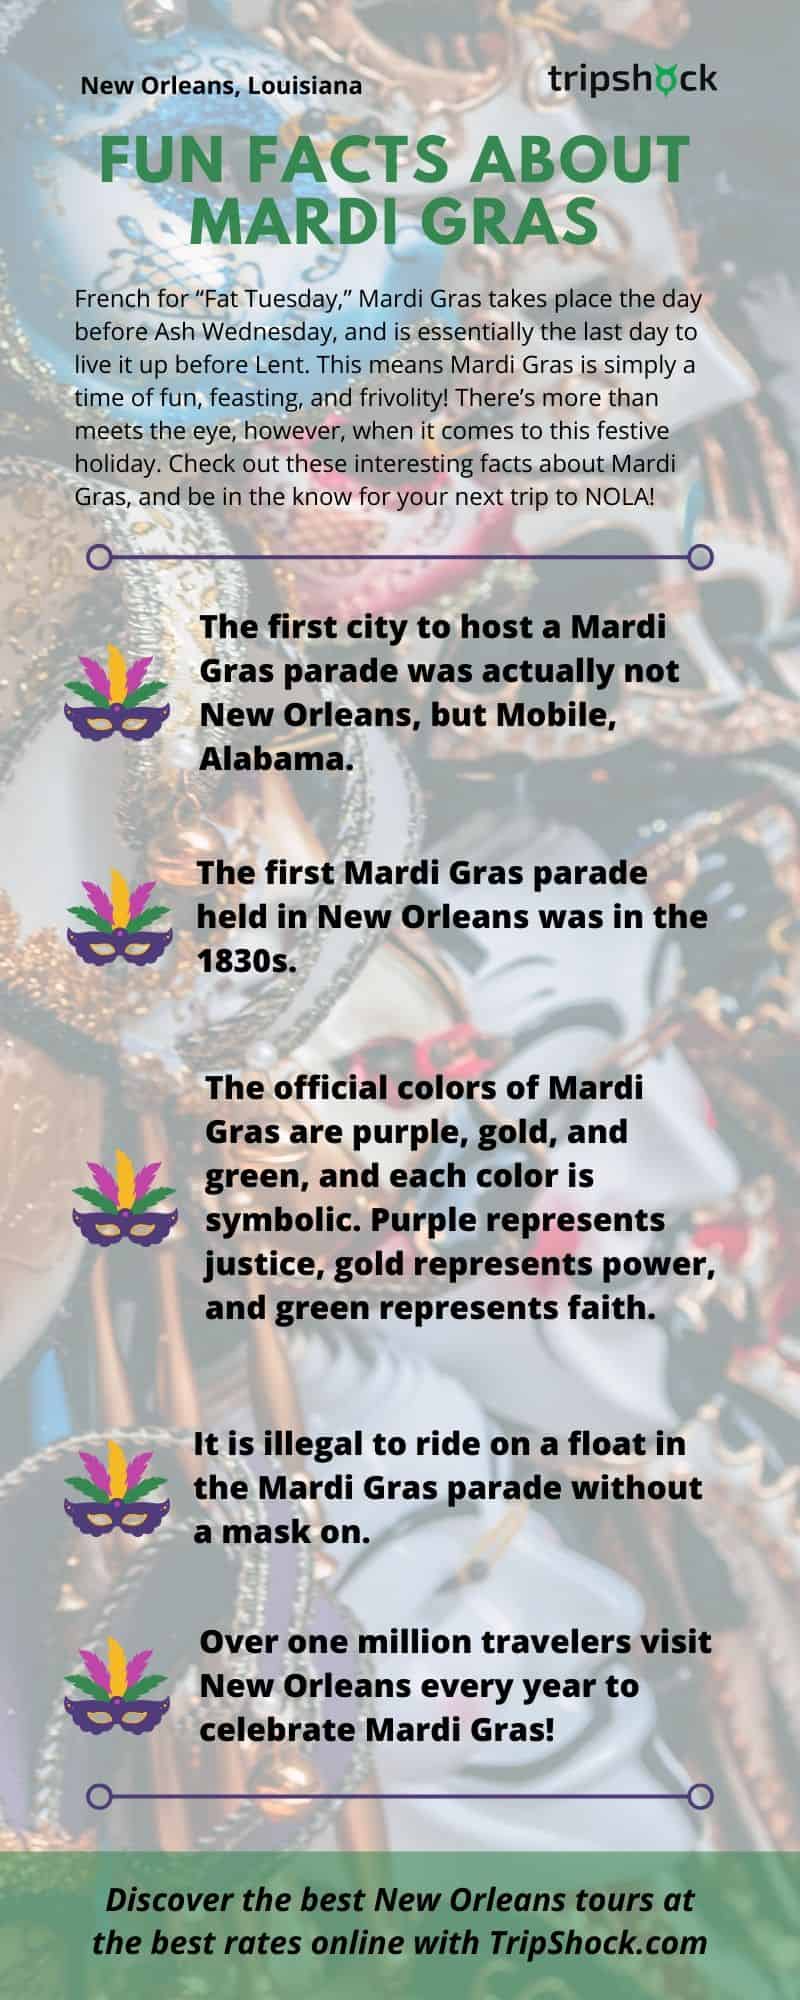 Fun Facts About Mardi Gras